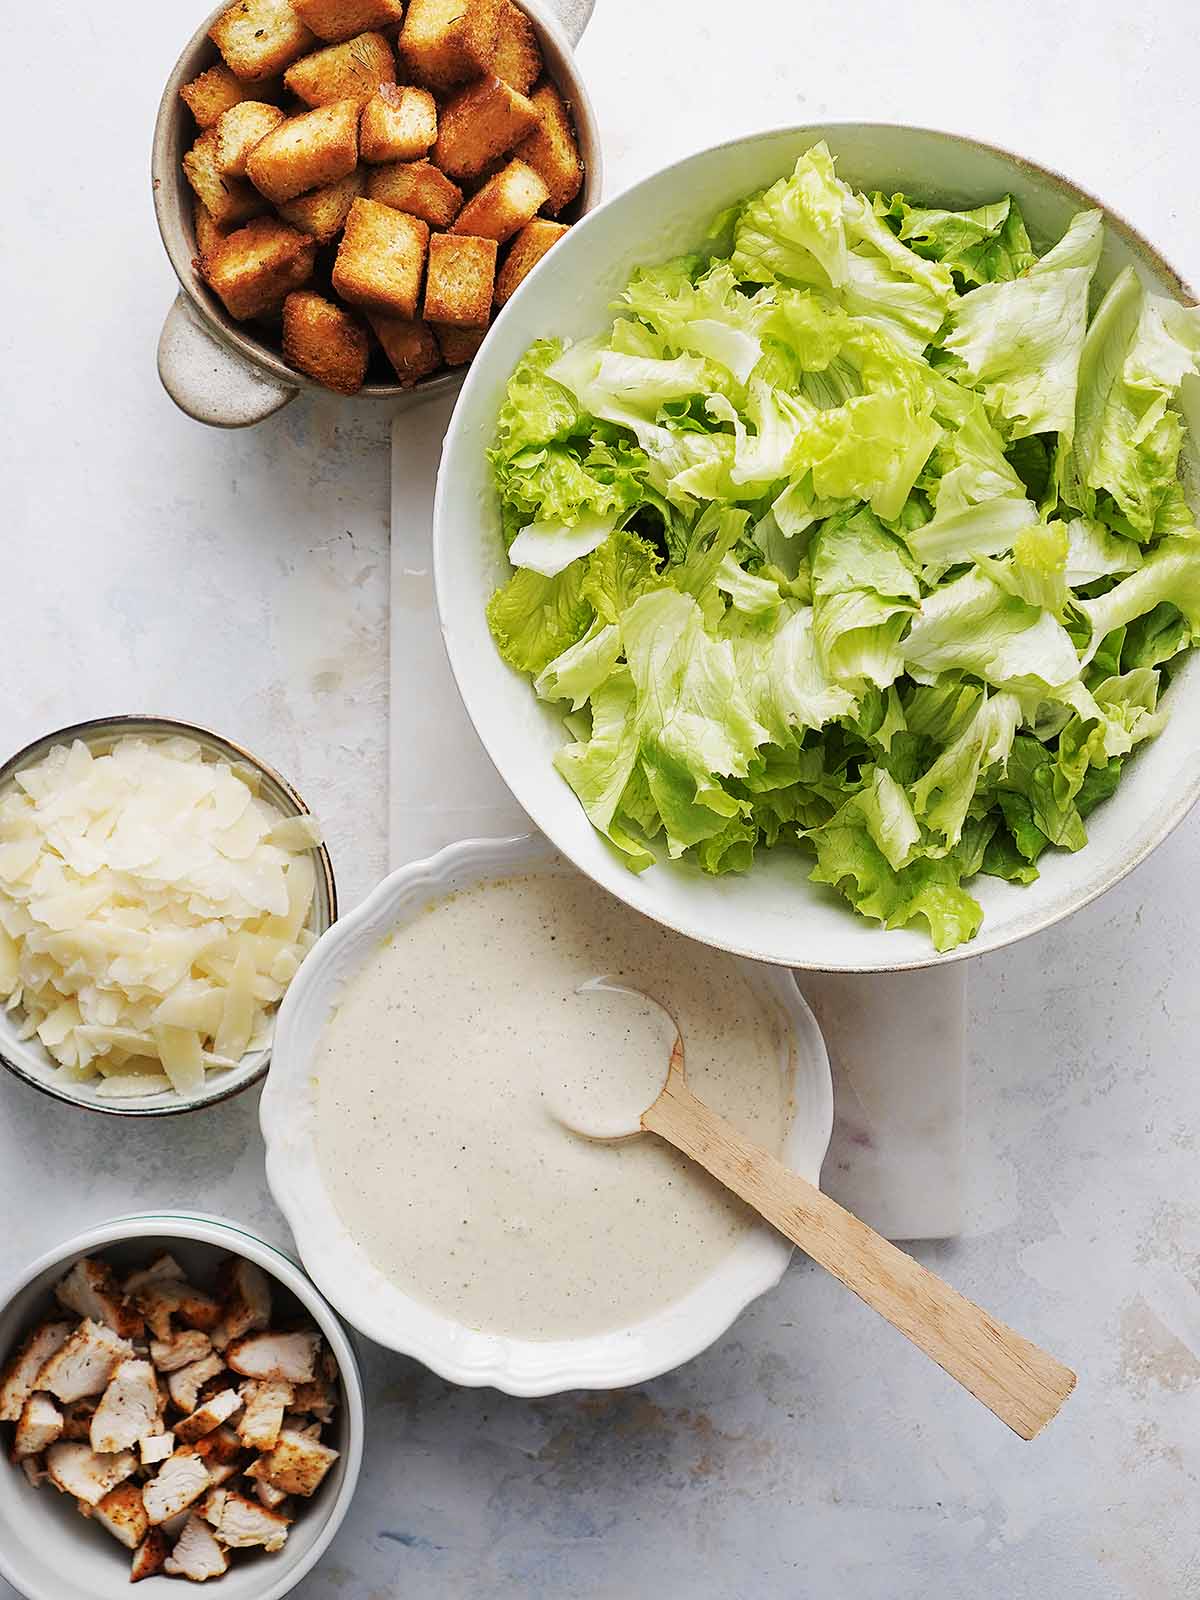 All of ingredients for the salad in separate bowls.